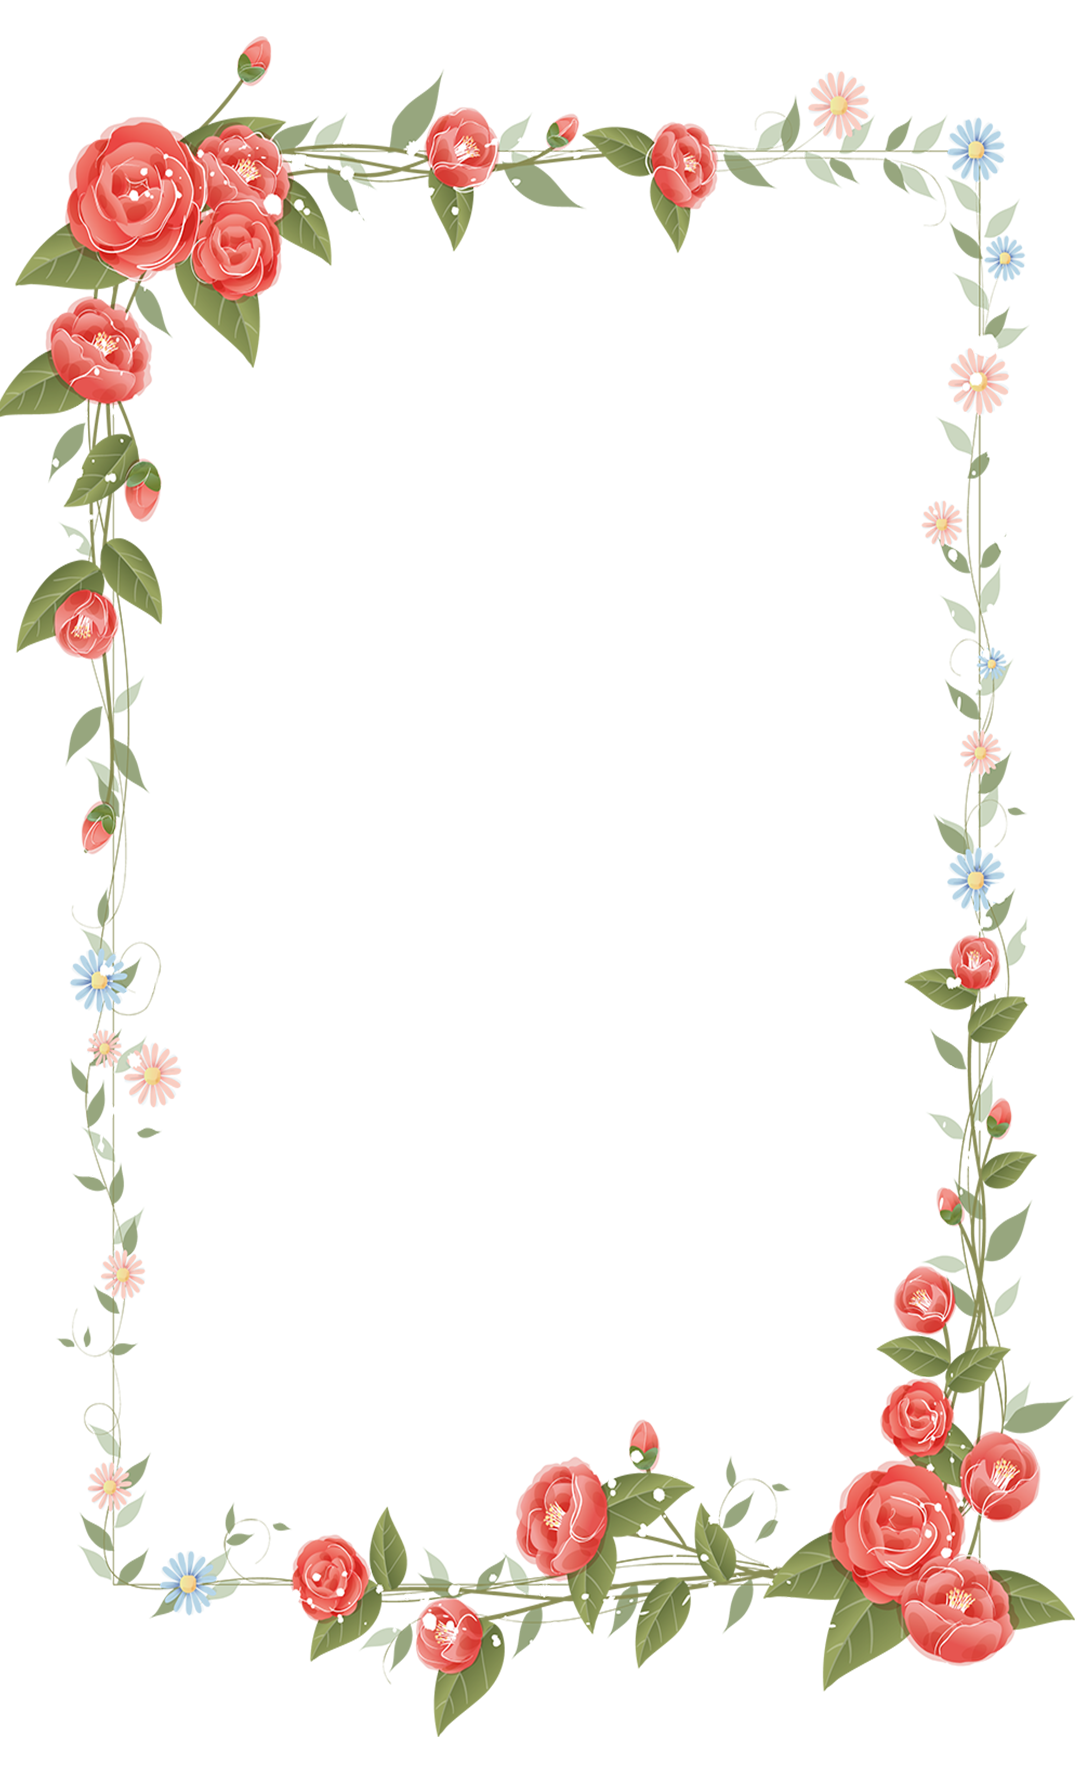 Hand Drawn Border Png Border Flowers Drawing Clip Art Hand Painted The Best Porn Website